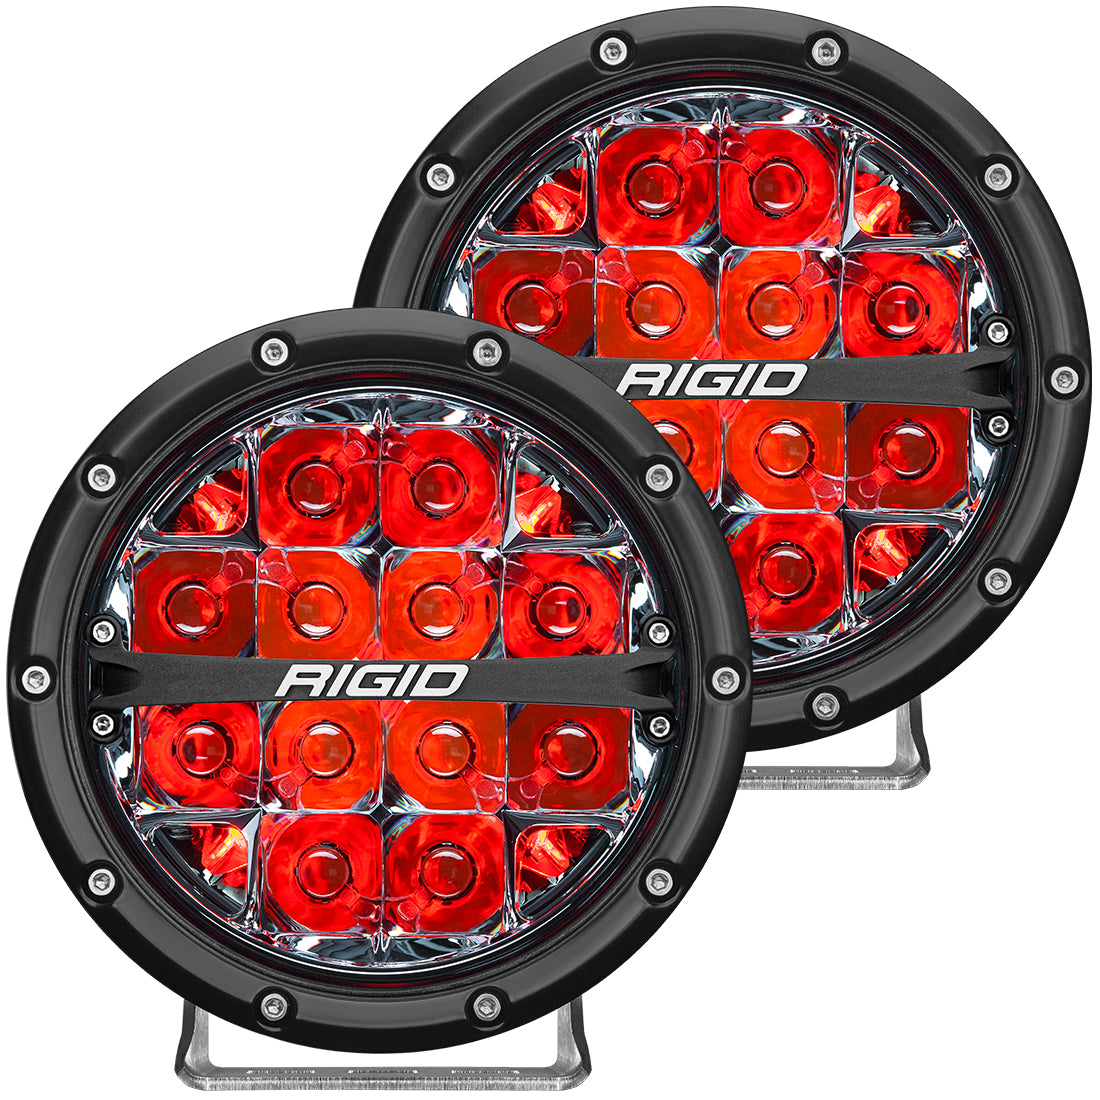 360-Series 6 Inch Off-Road LED Light, Spot Beam, Red Backlight, Pair